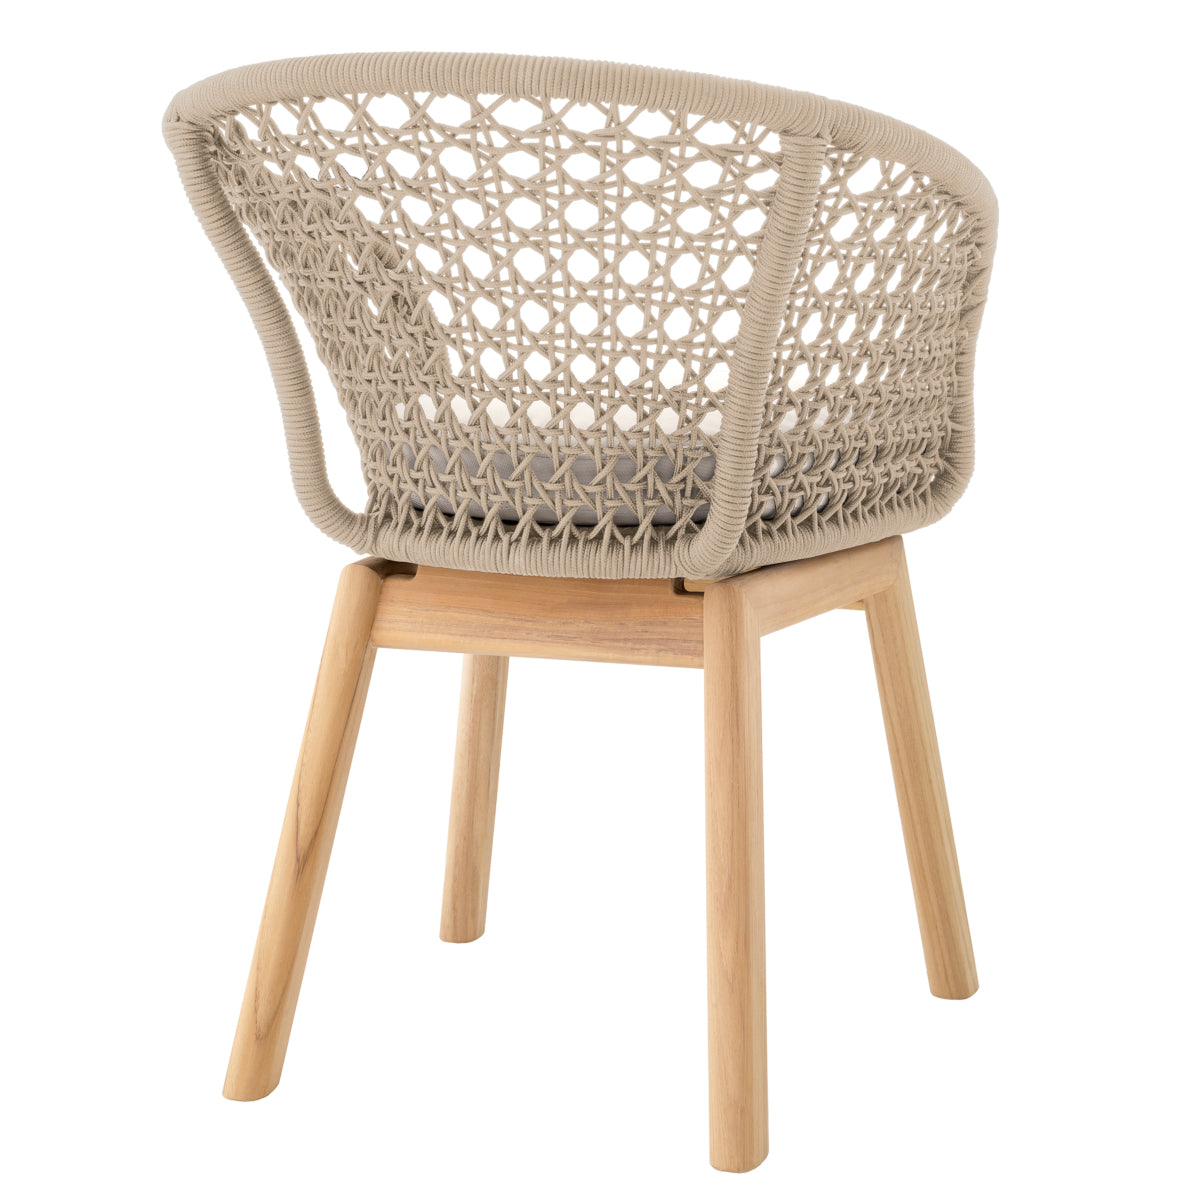 Outdoor Dining Chair Trinity cream weave flores off-white